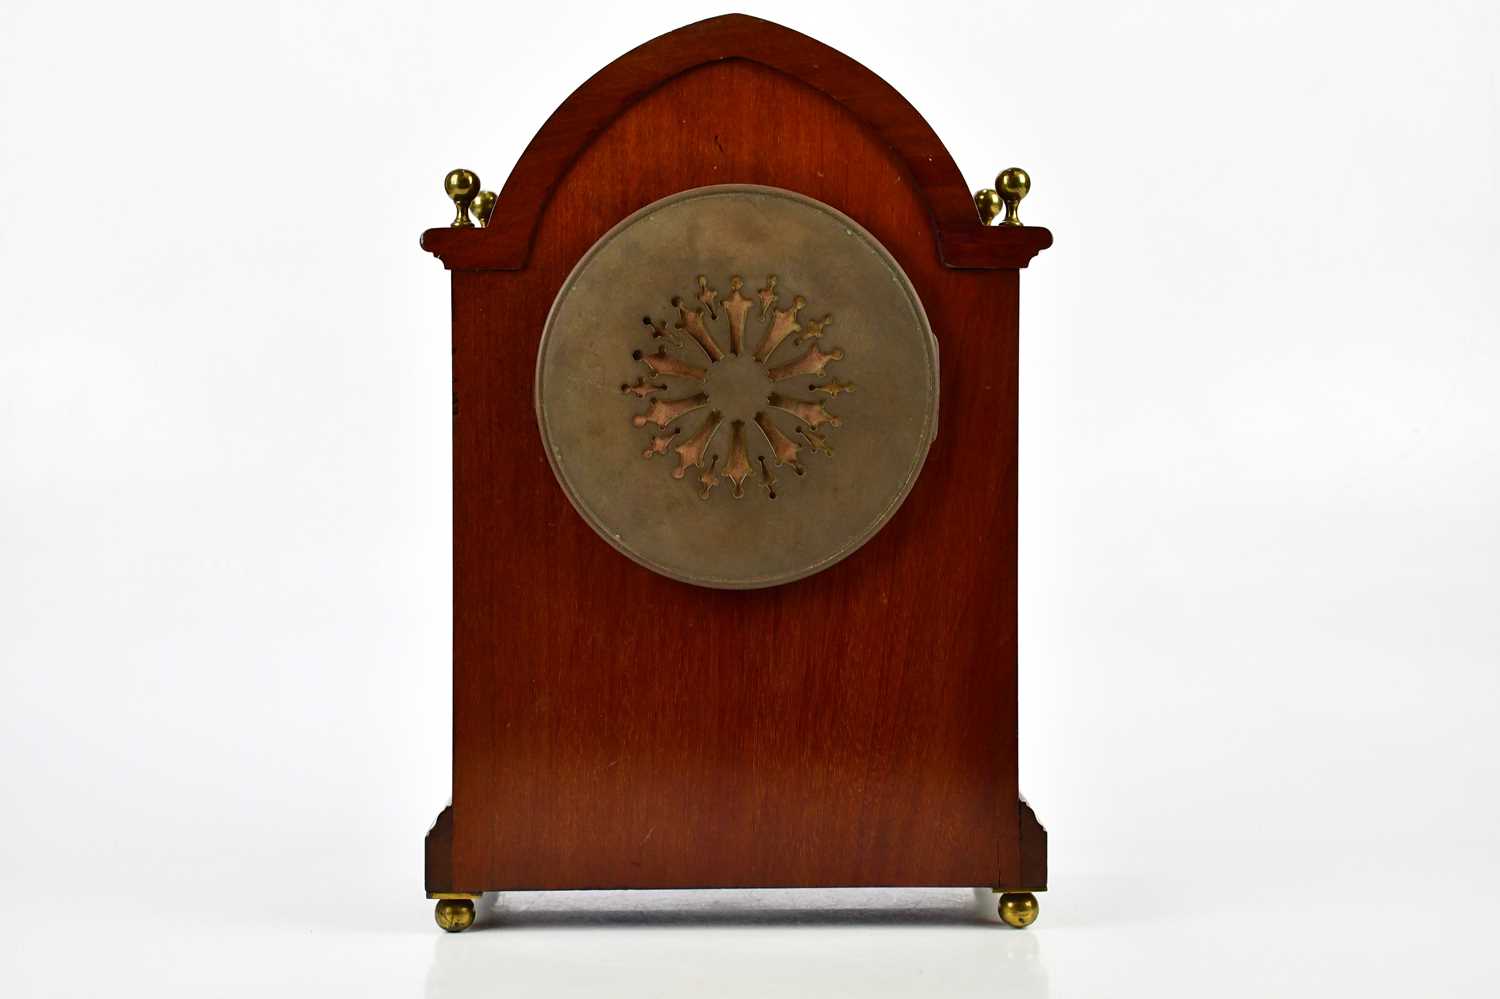 S SMITH & SONS LTD, LONDON; an Edwardian inlaid mahogany arch topped mantel clock with four brass - Image 5 of 6